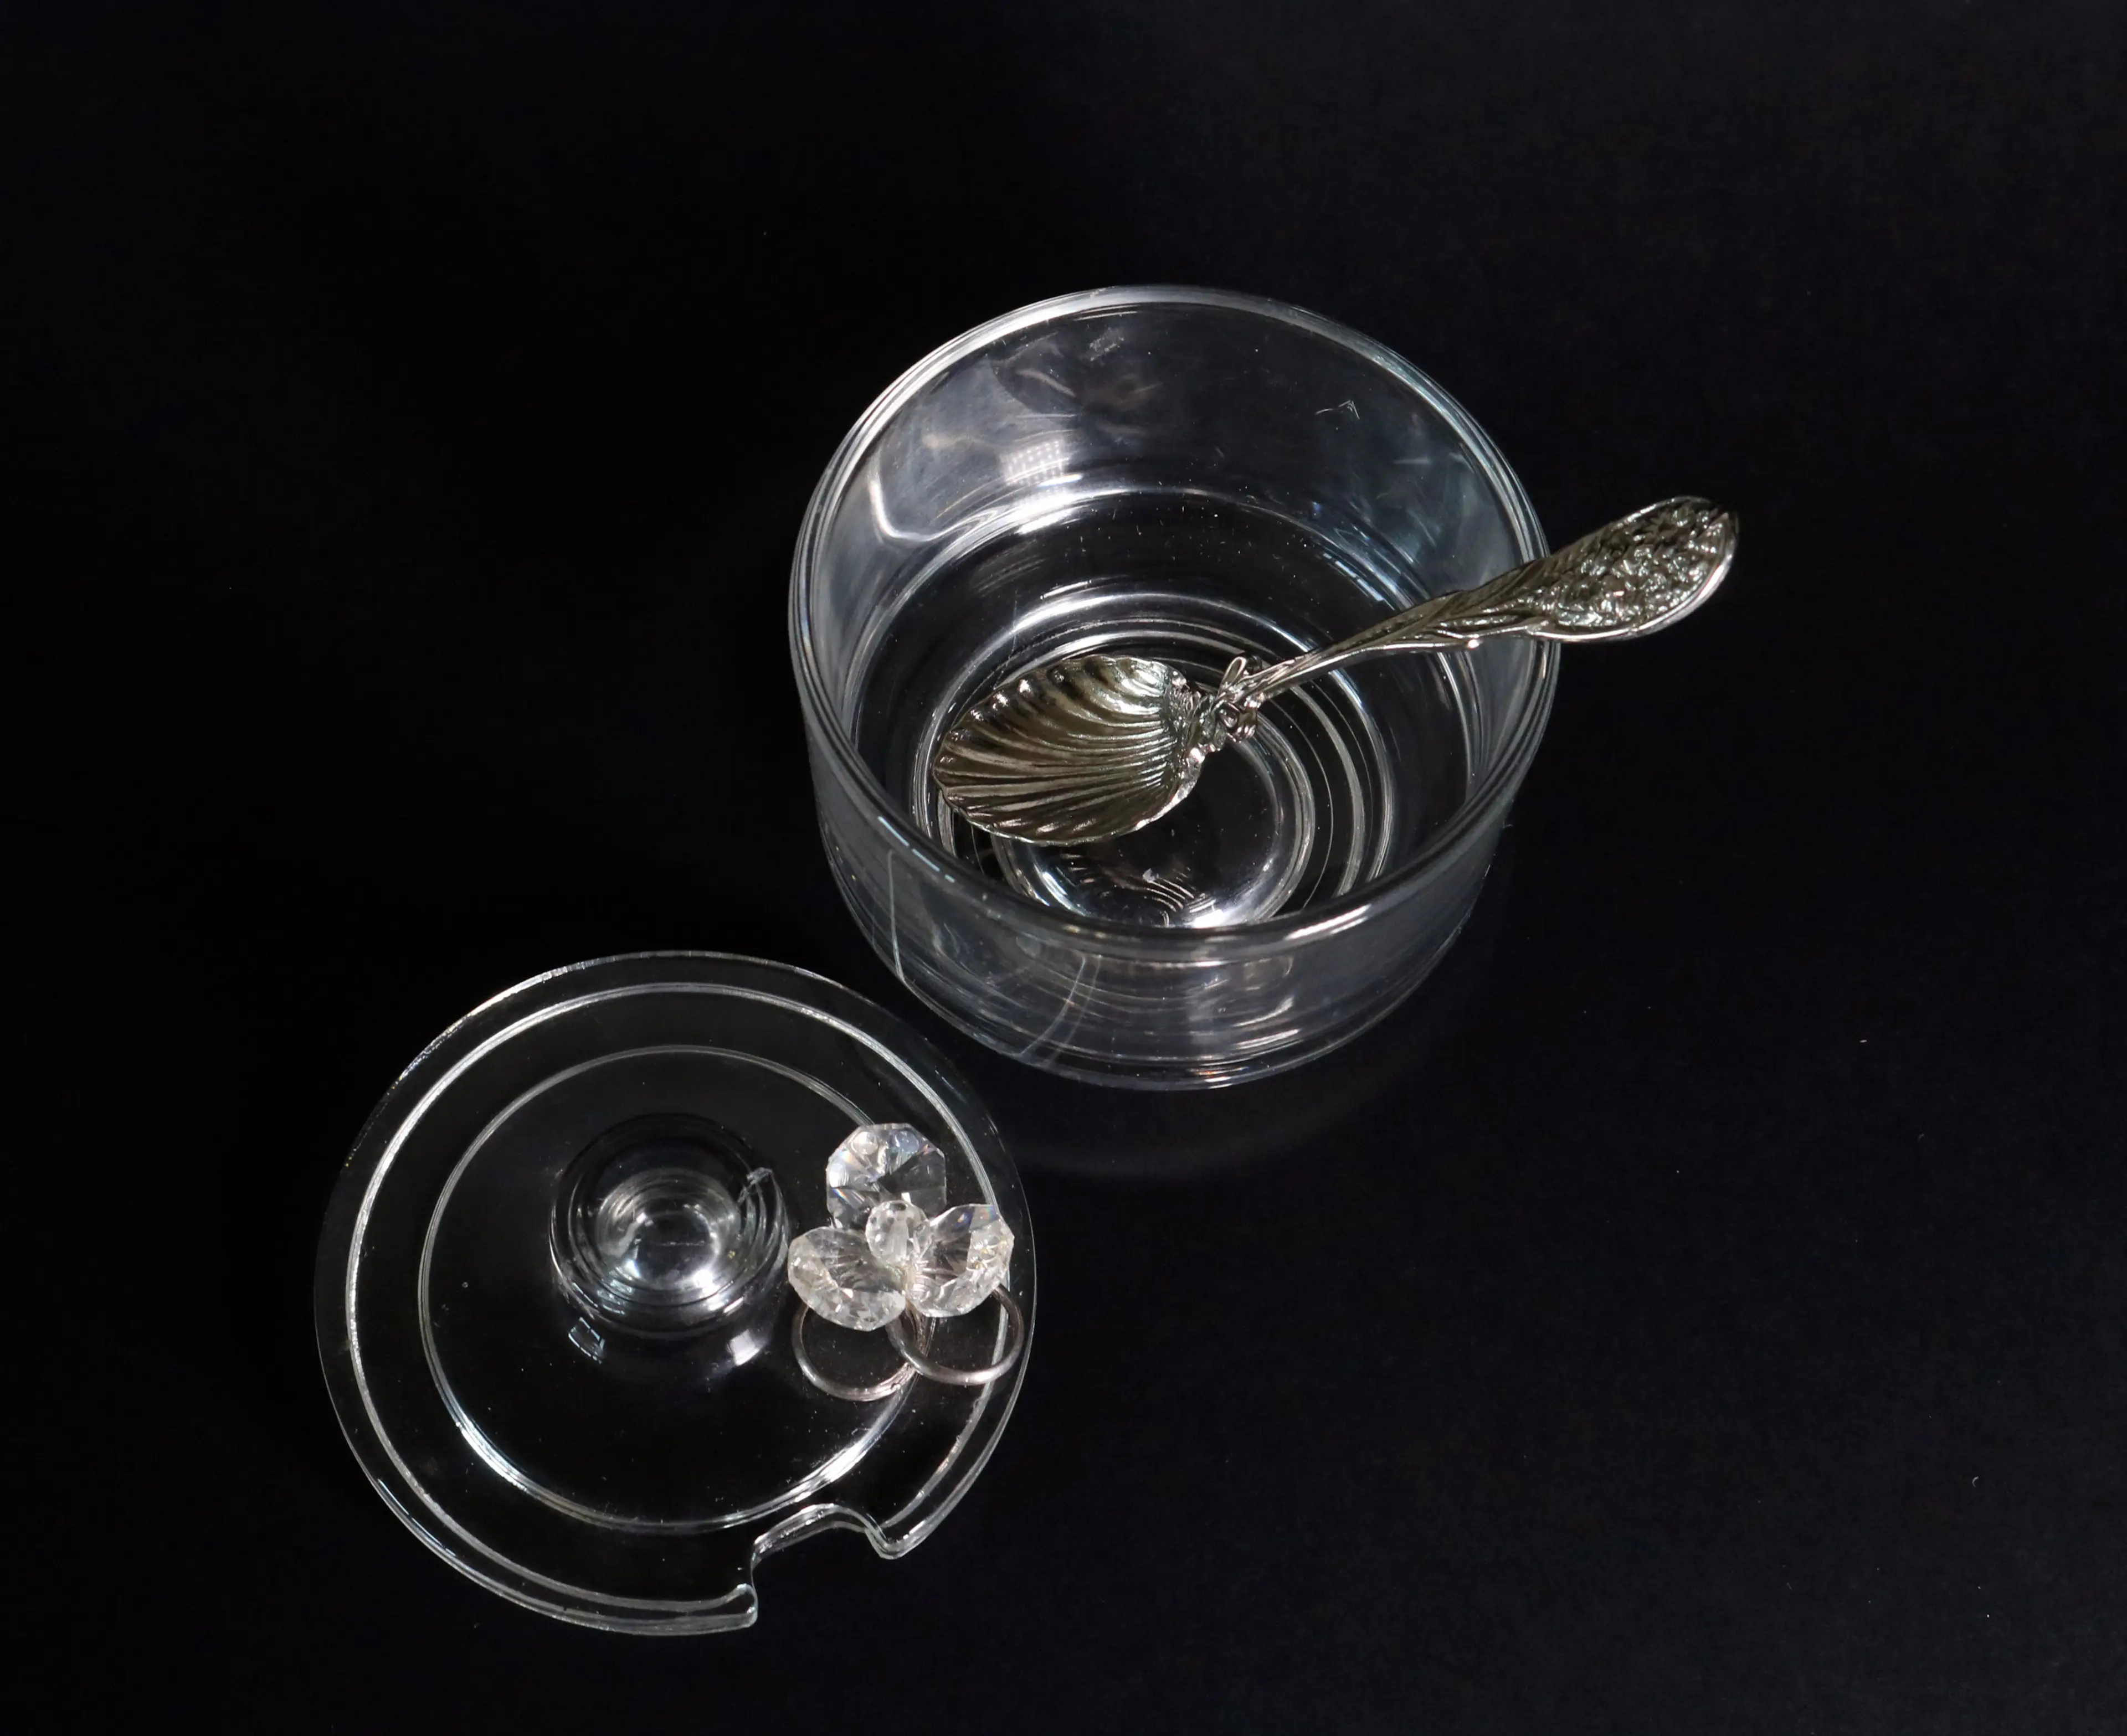 Sugar Jar With Lid And Spoon